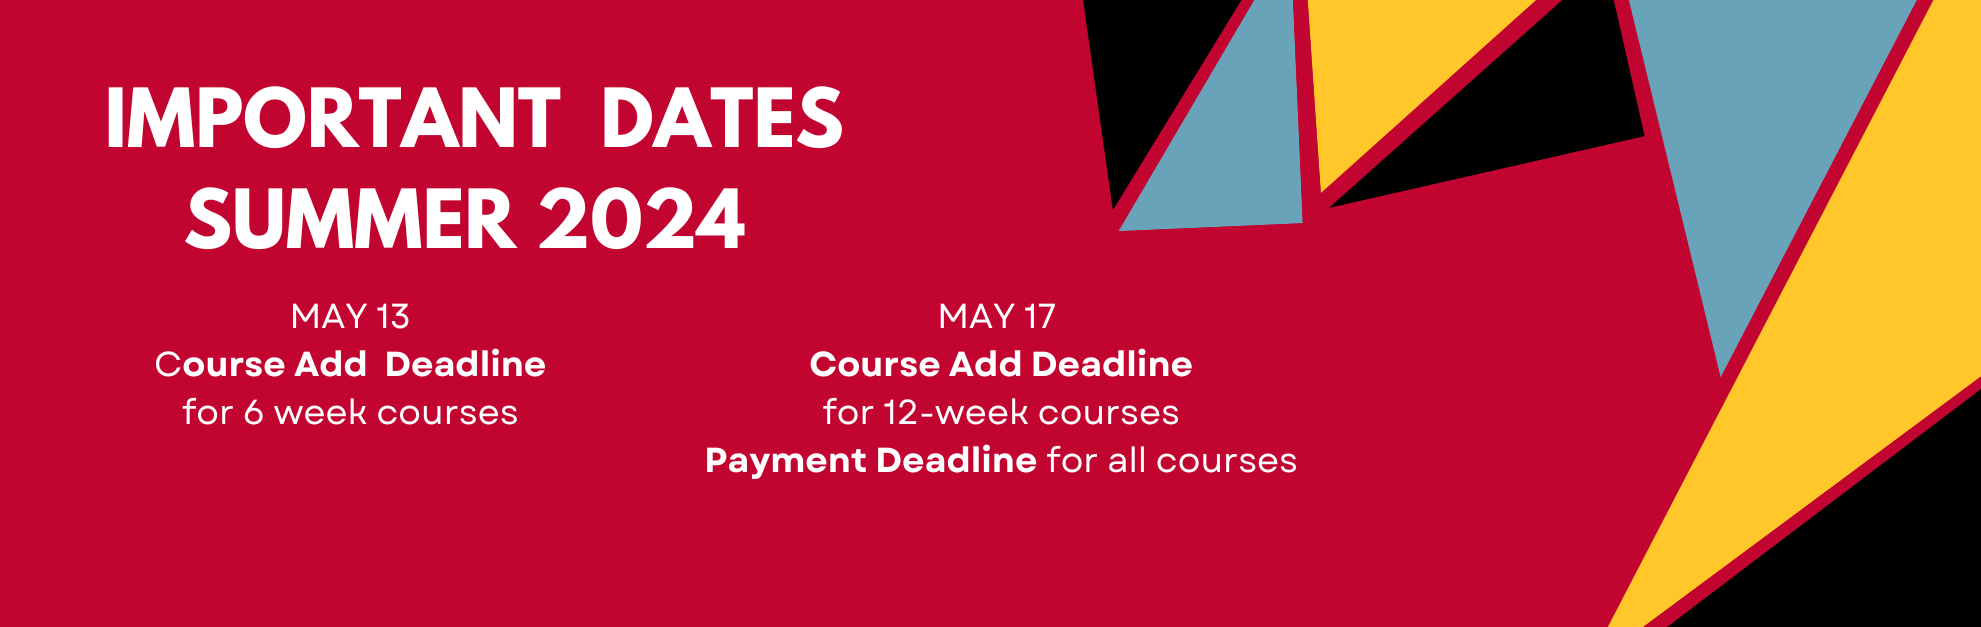 IMPORTANT Dates Summer 2024: MAY 13 Course Add  Deadline for 6 week courses and MAY 17  Course Add Deadline for 12-week courses Payment Deadline for all courses 